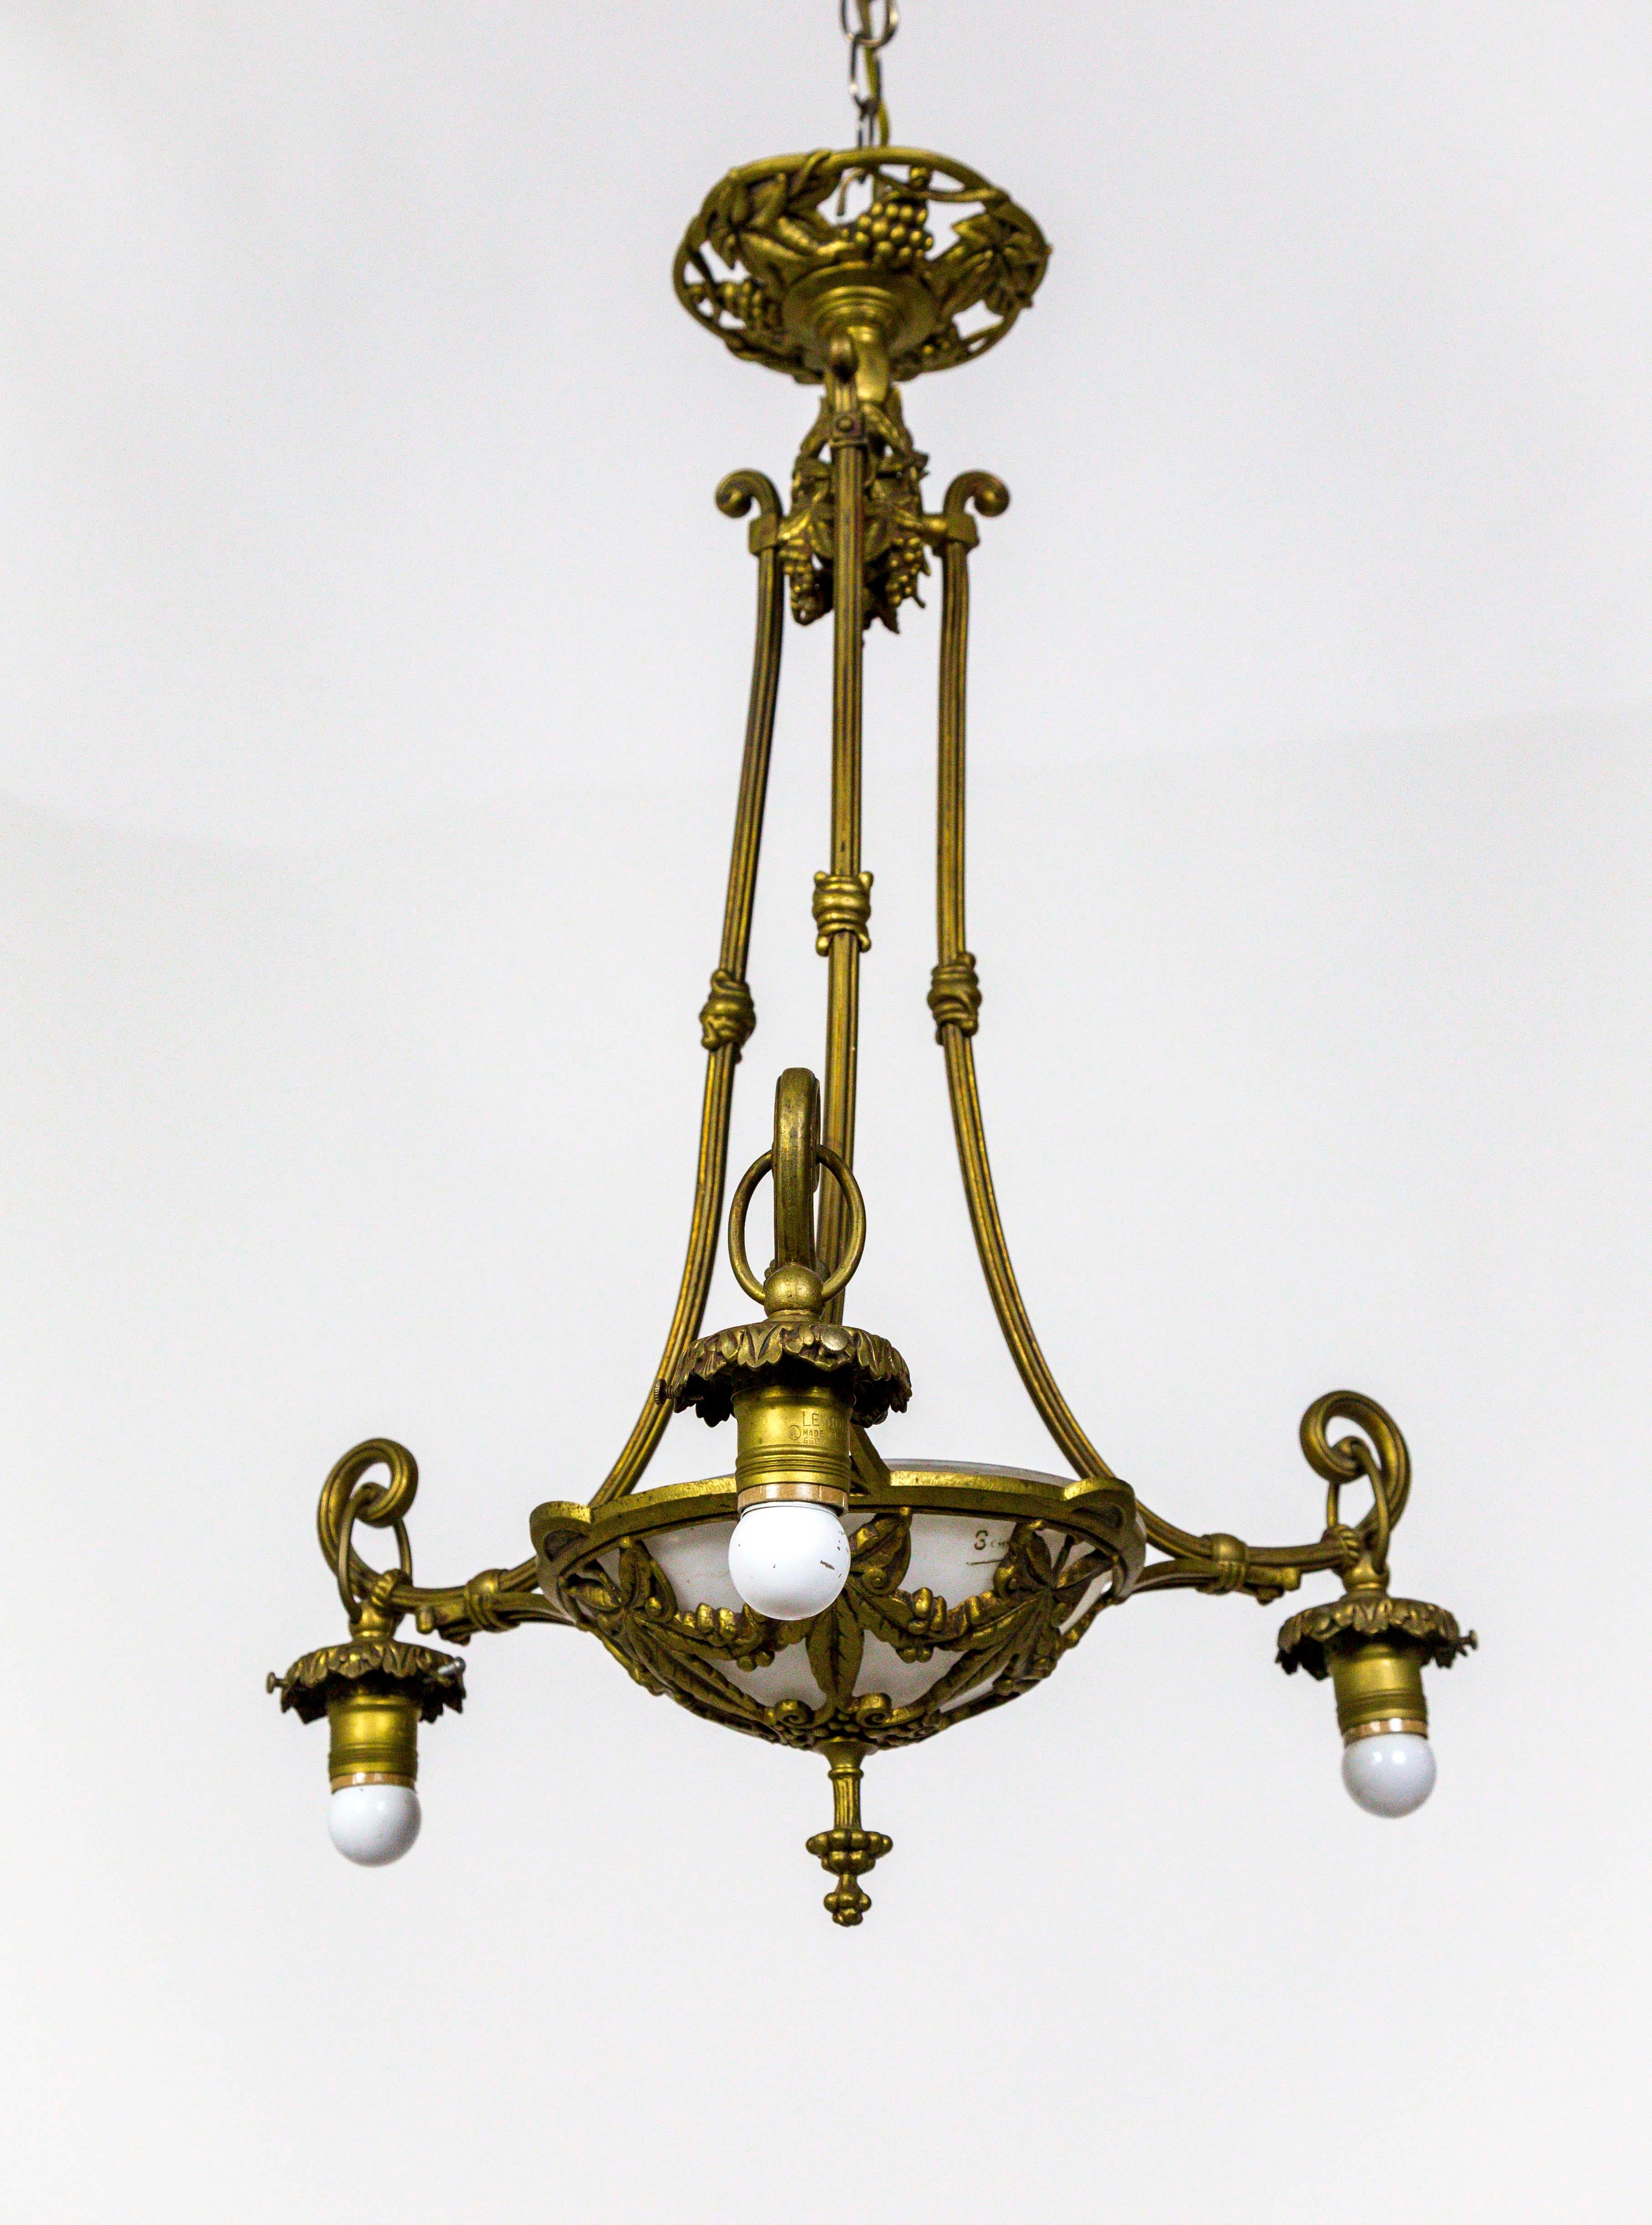 This 4-light, brass, Art Nouveau chandelier has 3 arms surrounding a circular, leaf and berry motif armature that holds a glass bowl. The design is echoed on the canopy and at the top of the stems. The fourth light is hidden and pointing down into